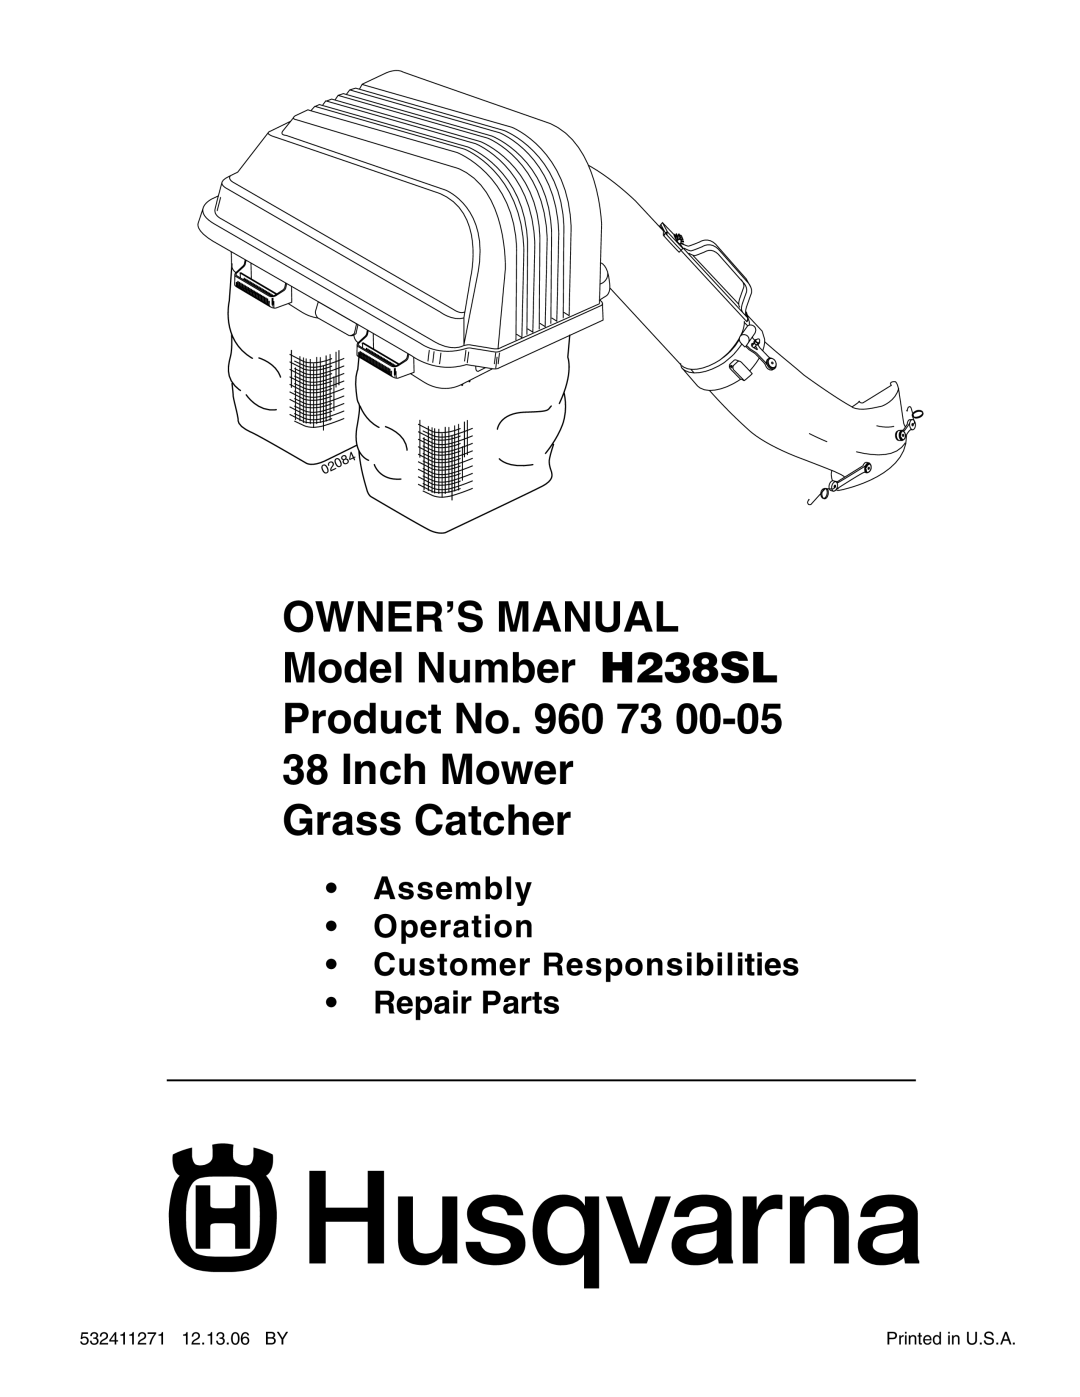 Husqvarna H238SL owner manual Product No. 960 73 38 Inch Mower Grass Catcher, Assembly Operation Customer Responsibilities 